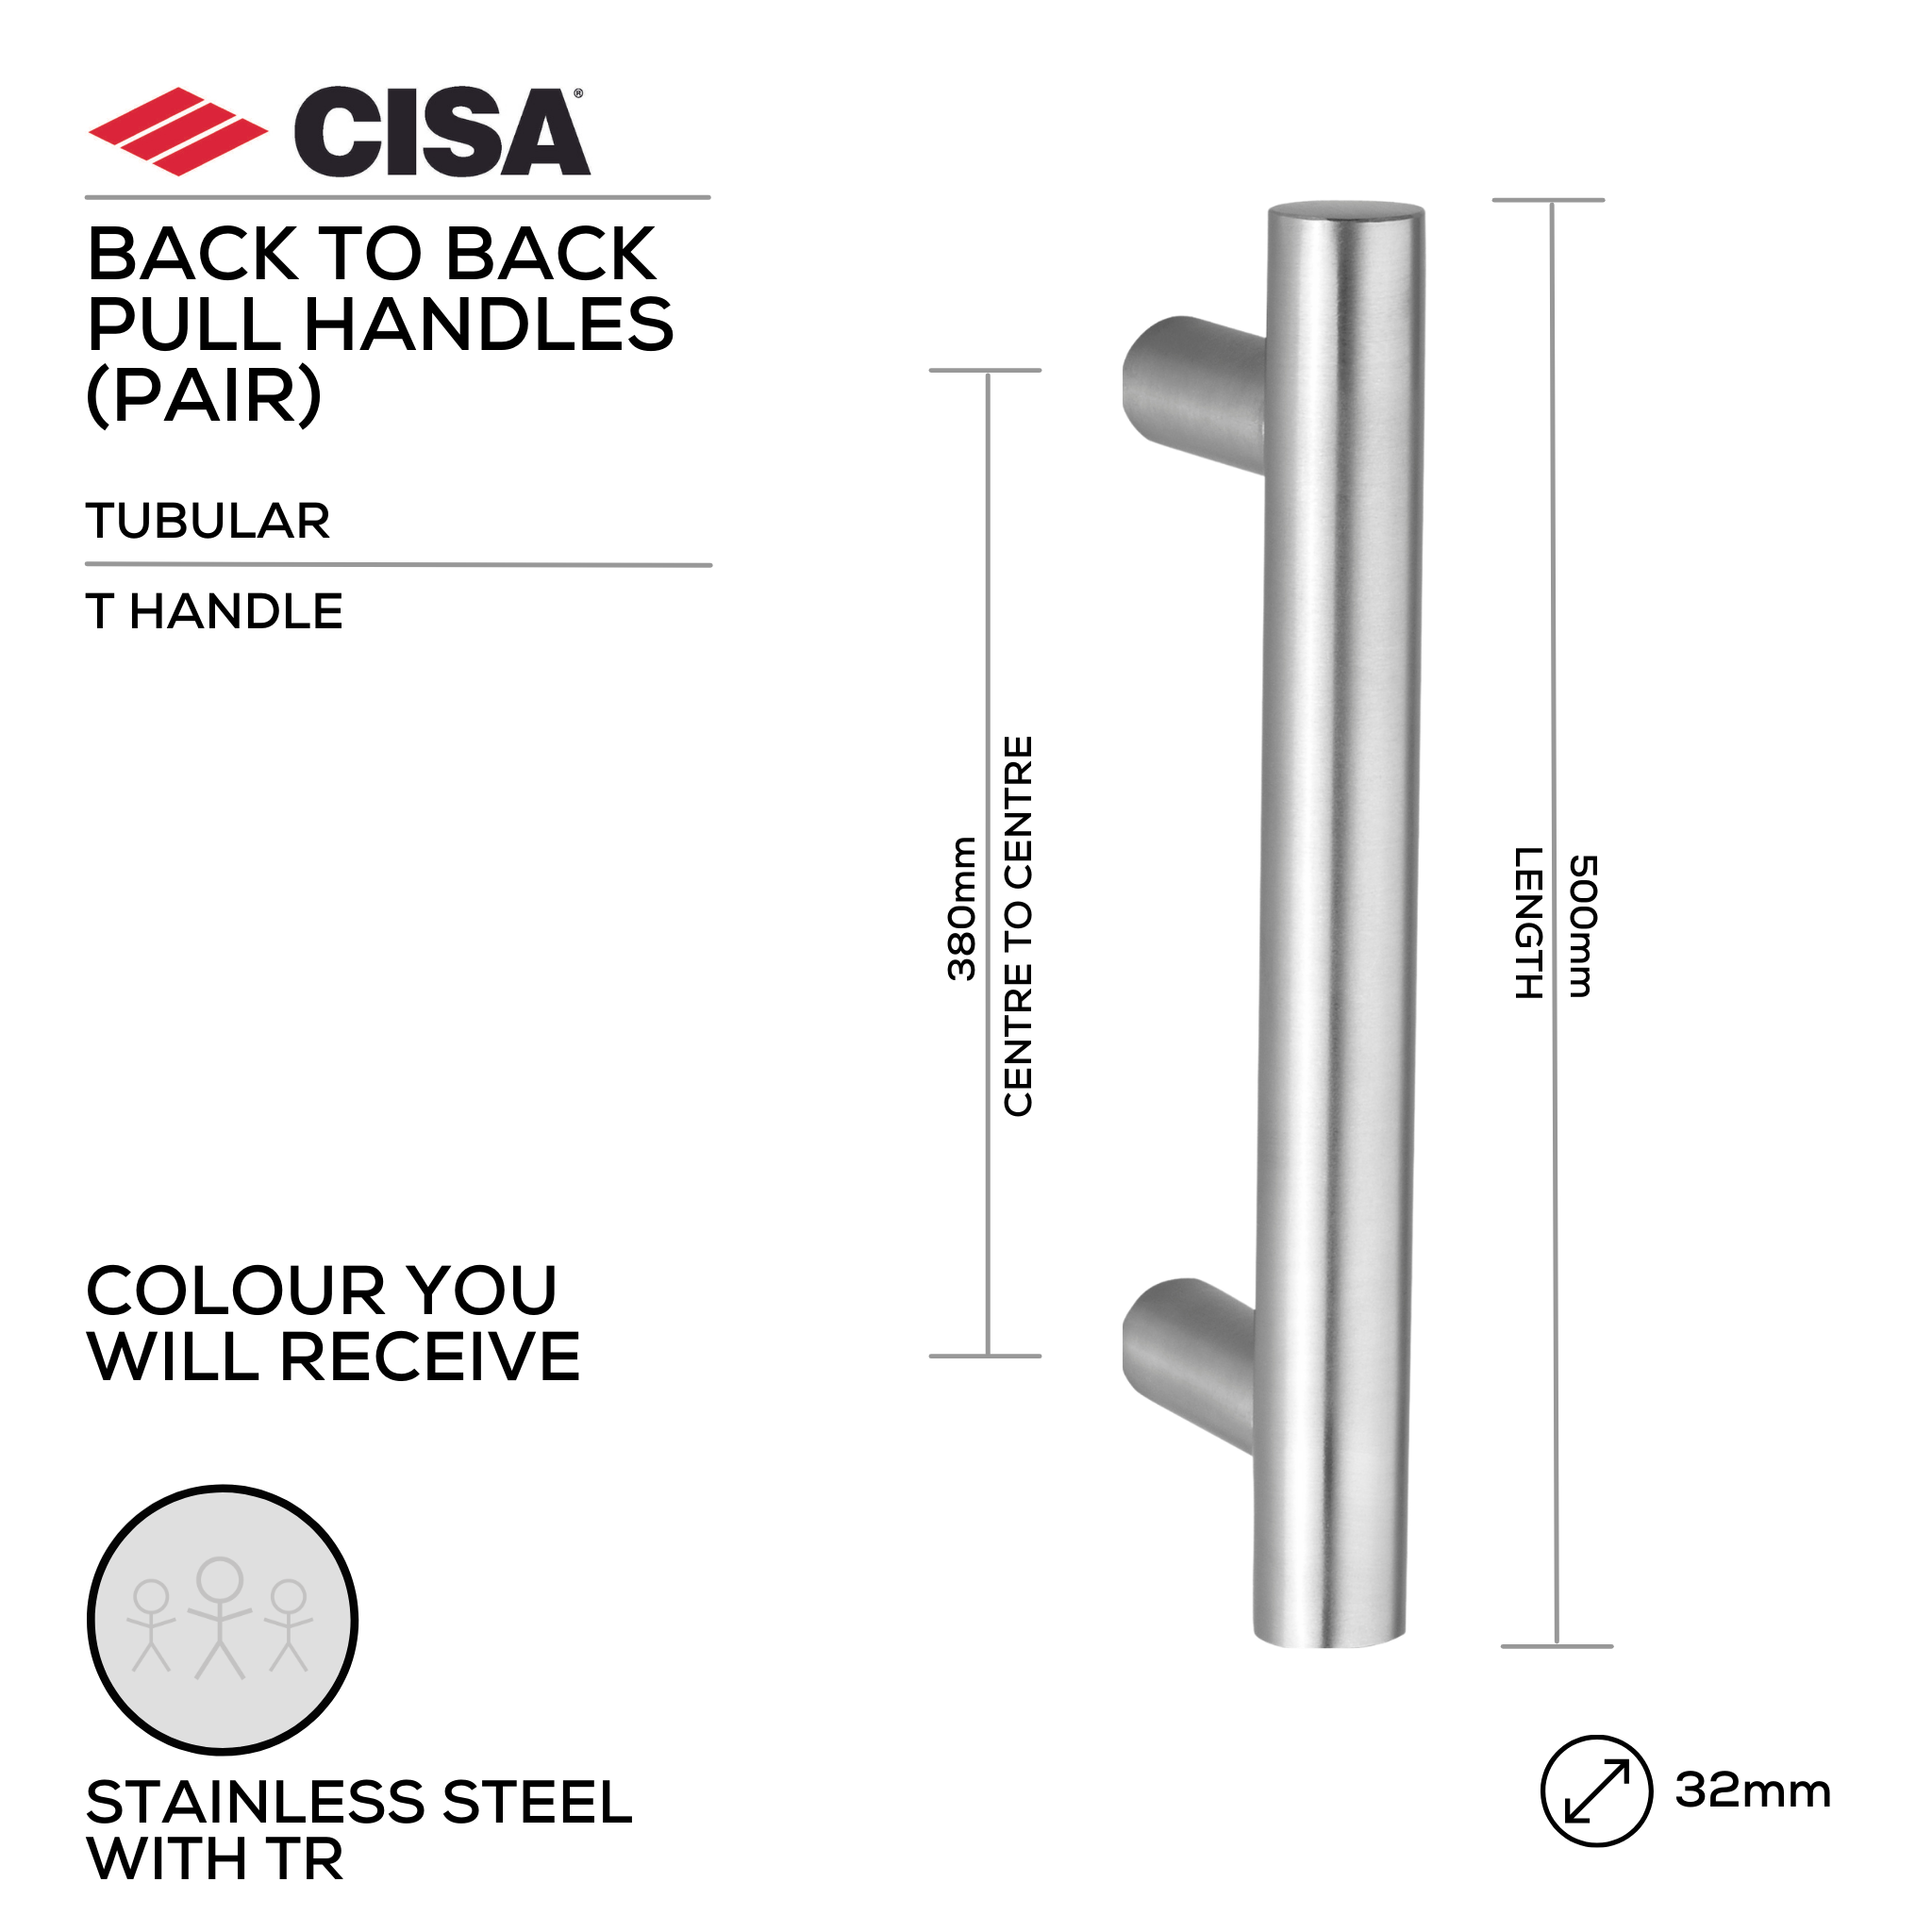 FP.T04.BB.TR, Pull Handle, Tubular, T Handle, BTB, 32mm (Ø) x 500mm (l) x 380mm (ctc), Stainless Steel with Tarnish Resistant, CISA